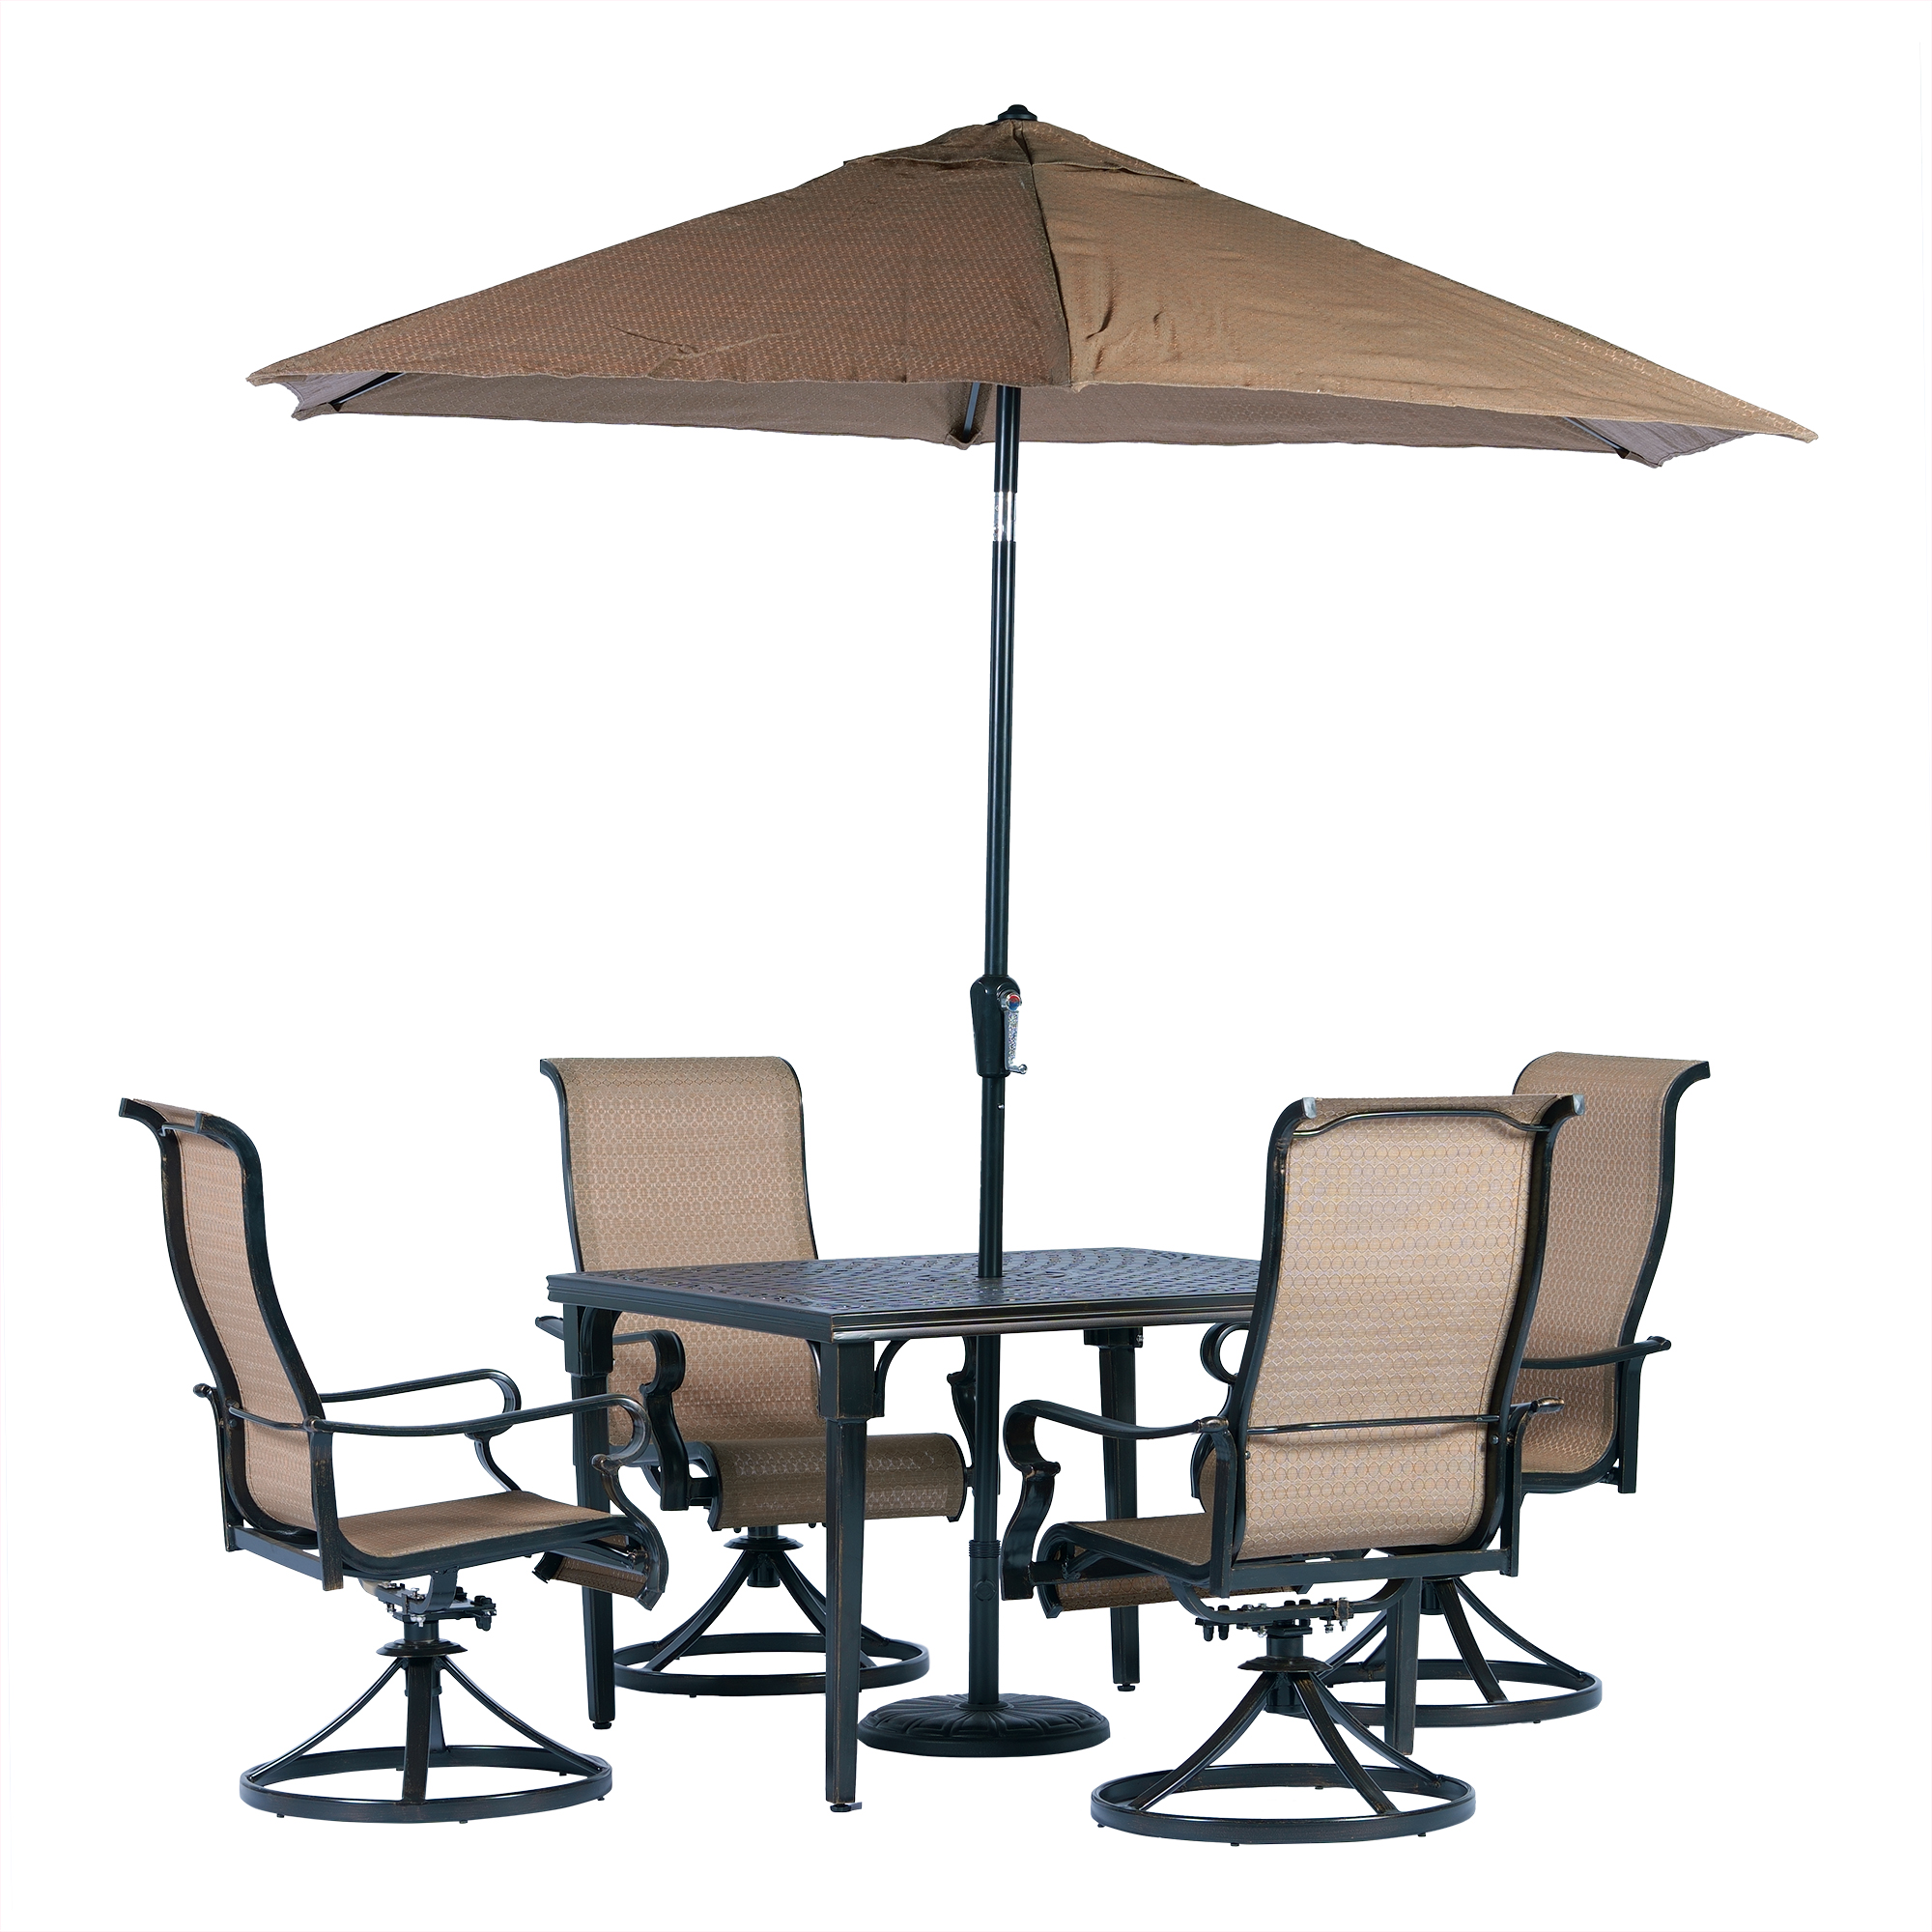 Hanover Brigantine 5-Piece Modern Outdoor Dining Set with 9 Ft. Umbrella | 4 Contoured Swivel Rocker Chairs | 42'' Square Cast-Top Table | Weather, Rust, UV Resistant | Tan/Bronze | BRIGDN5PCSWSQ-SU - image 1 of 10